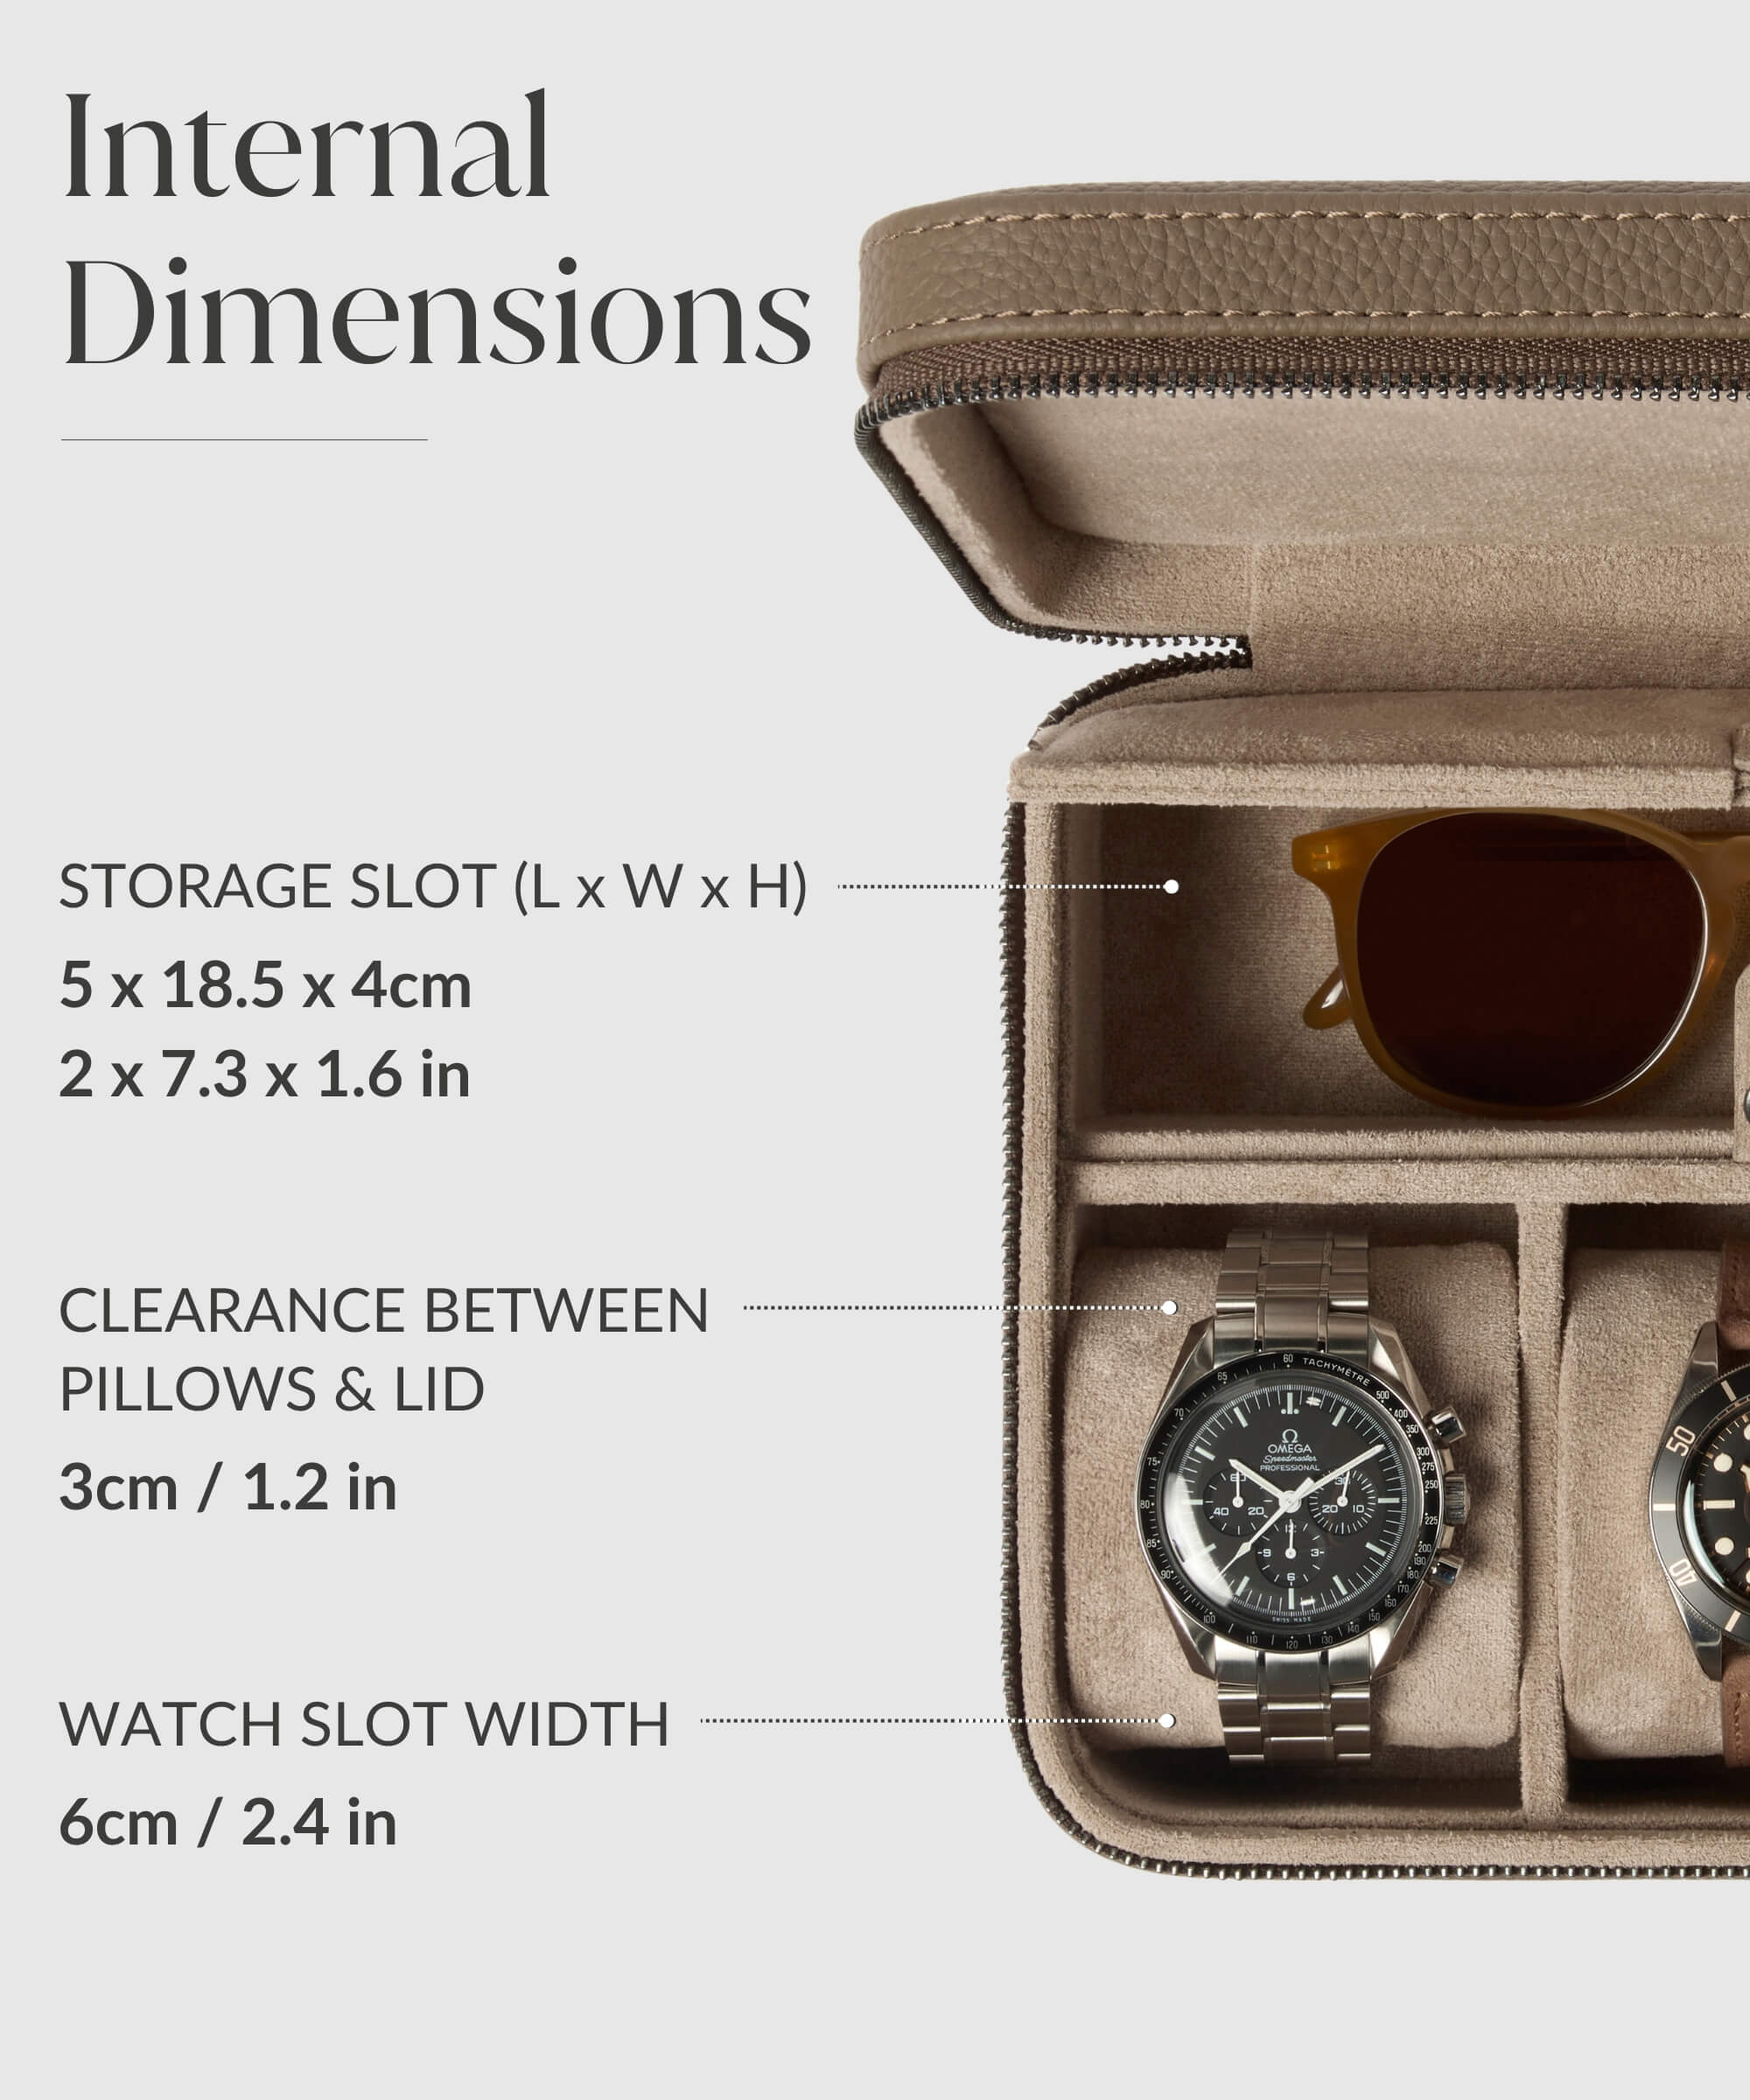 A TAWBURY Fraser 3 Watch Travel Case with Storage - Taupe designed for watch lovers, providing protection for their cherished timepieces and sunglasses during their journeys.